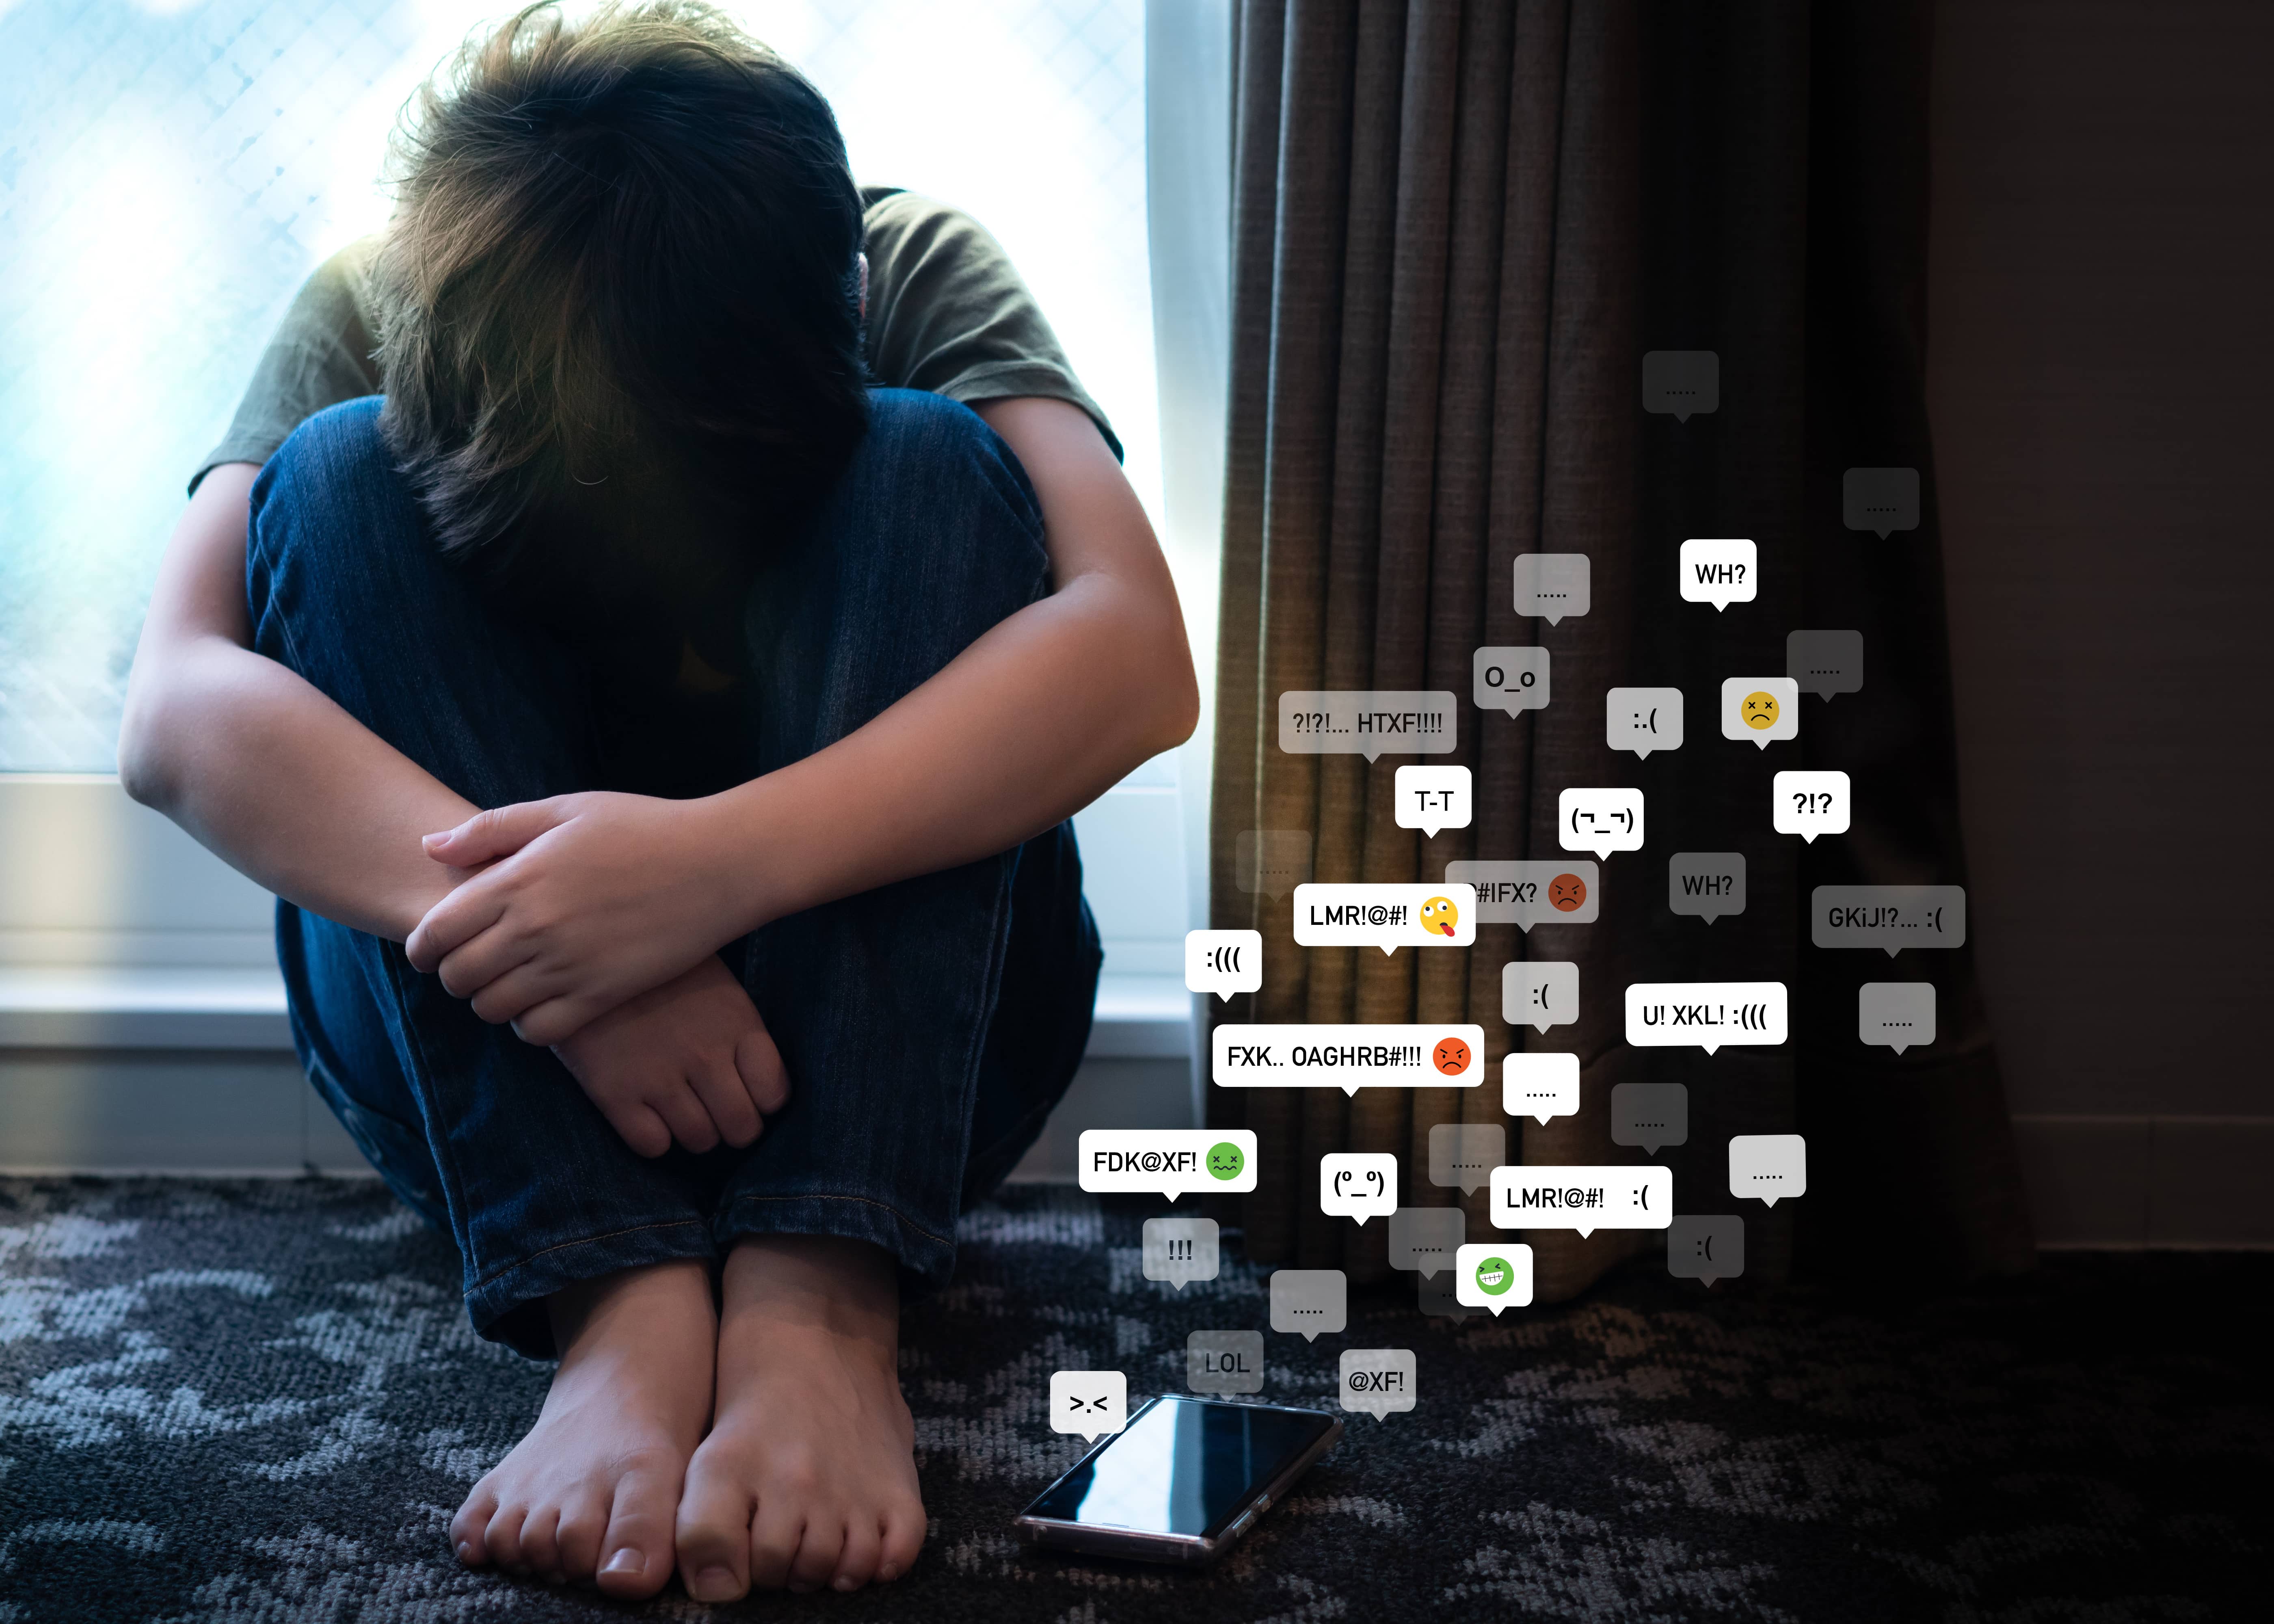 Parenting Support for Children and Teens: How to Put a Stop to Cyberbullying